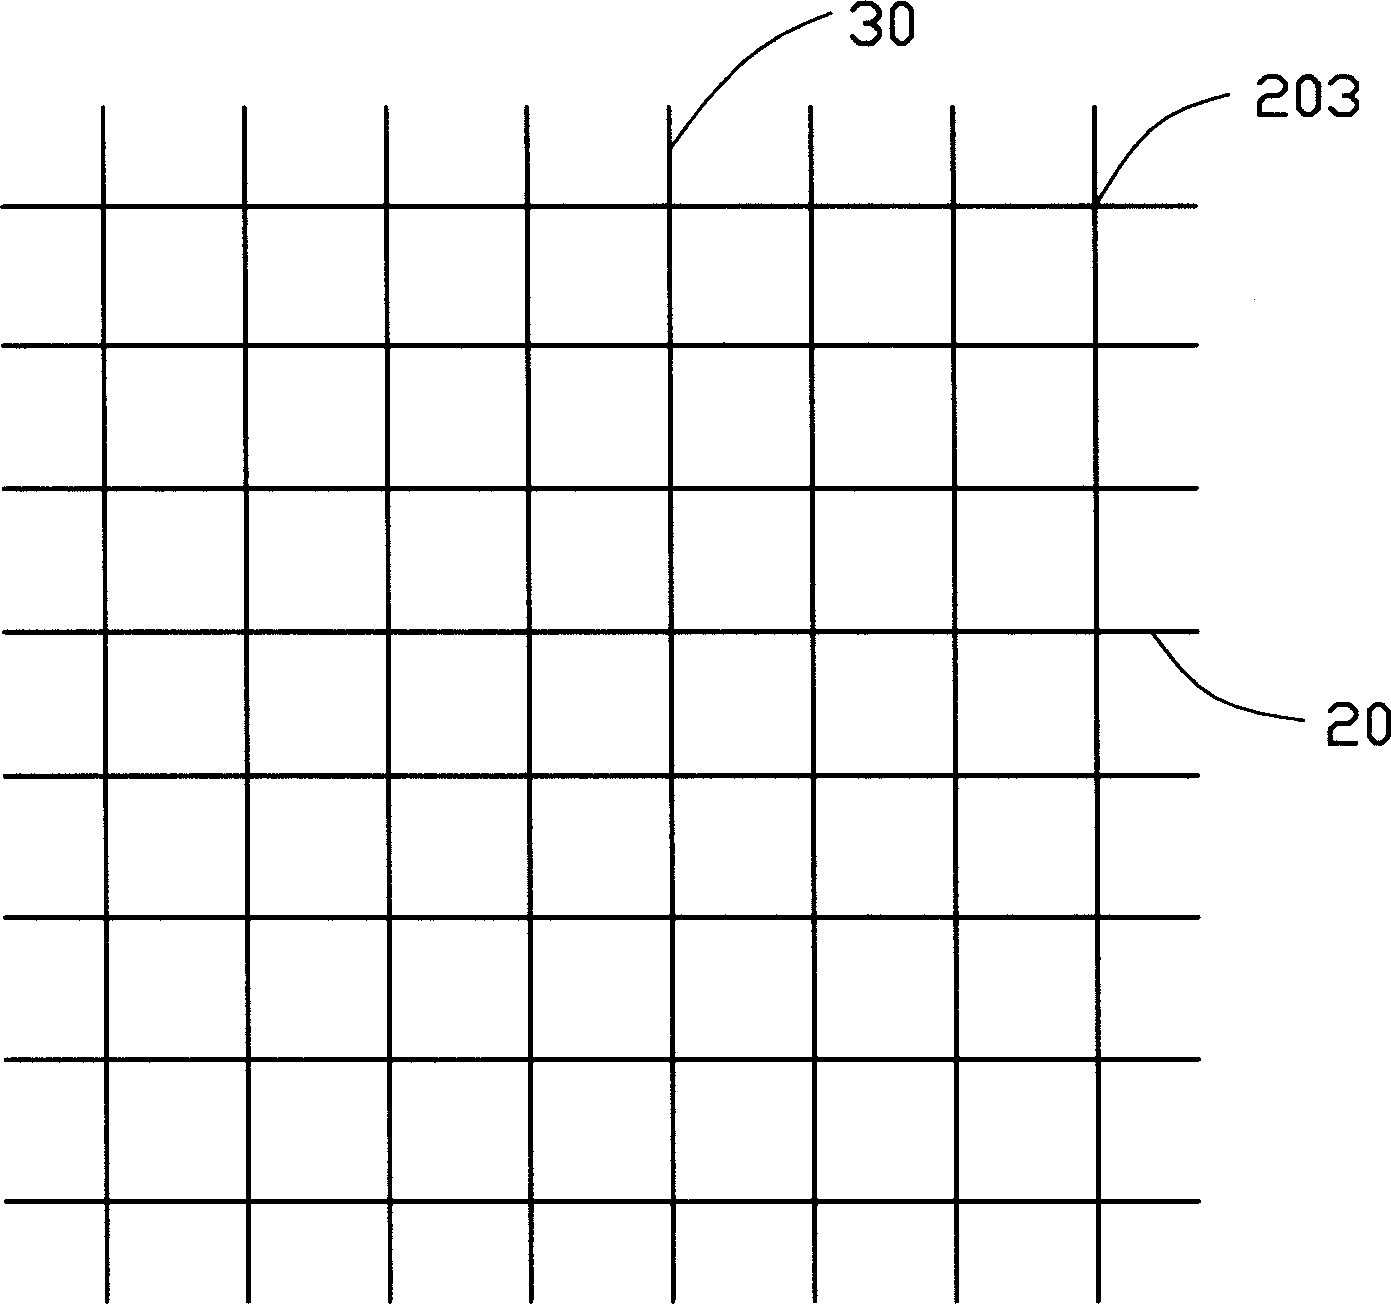 Method for interconnecting multiple printed circuit boards